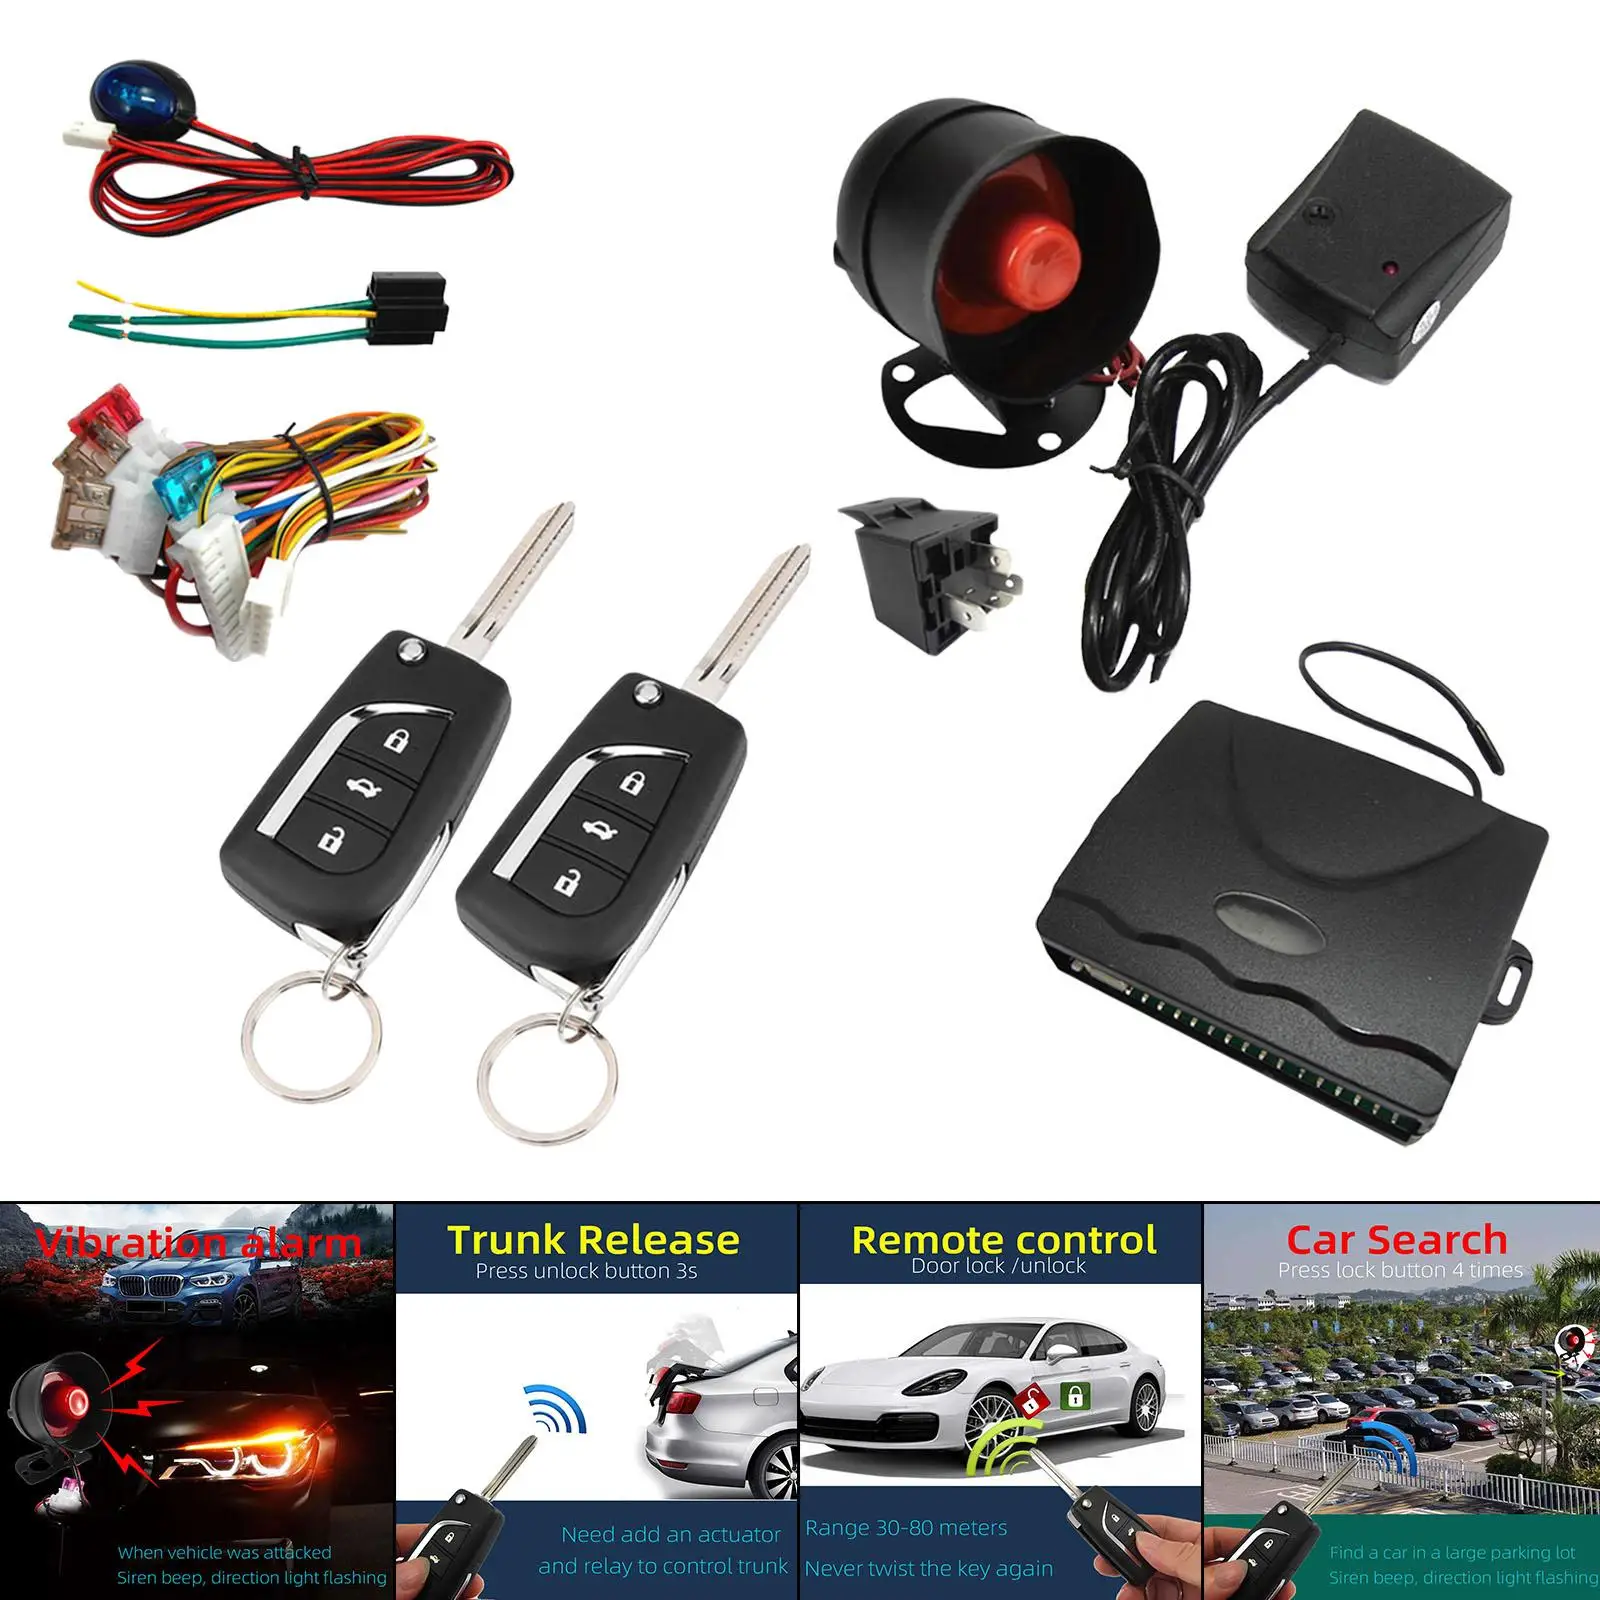 Universal 1 Way Remote Start Car Alarm Security System with 2 Remote Contorl